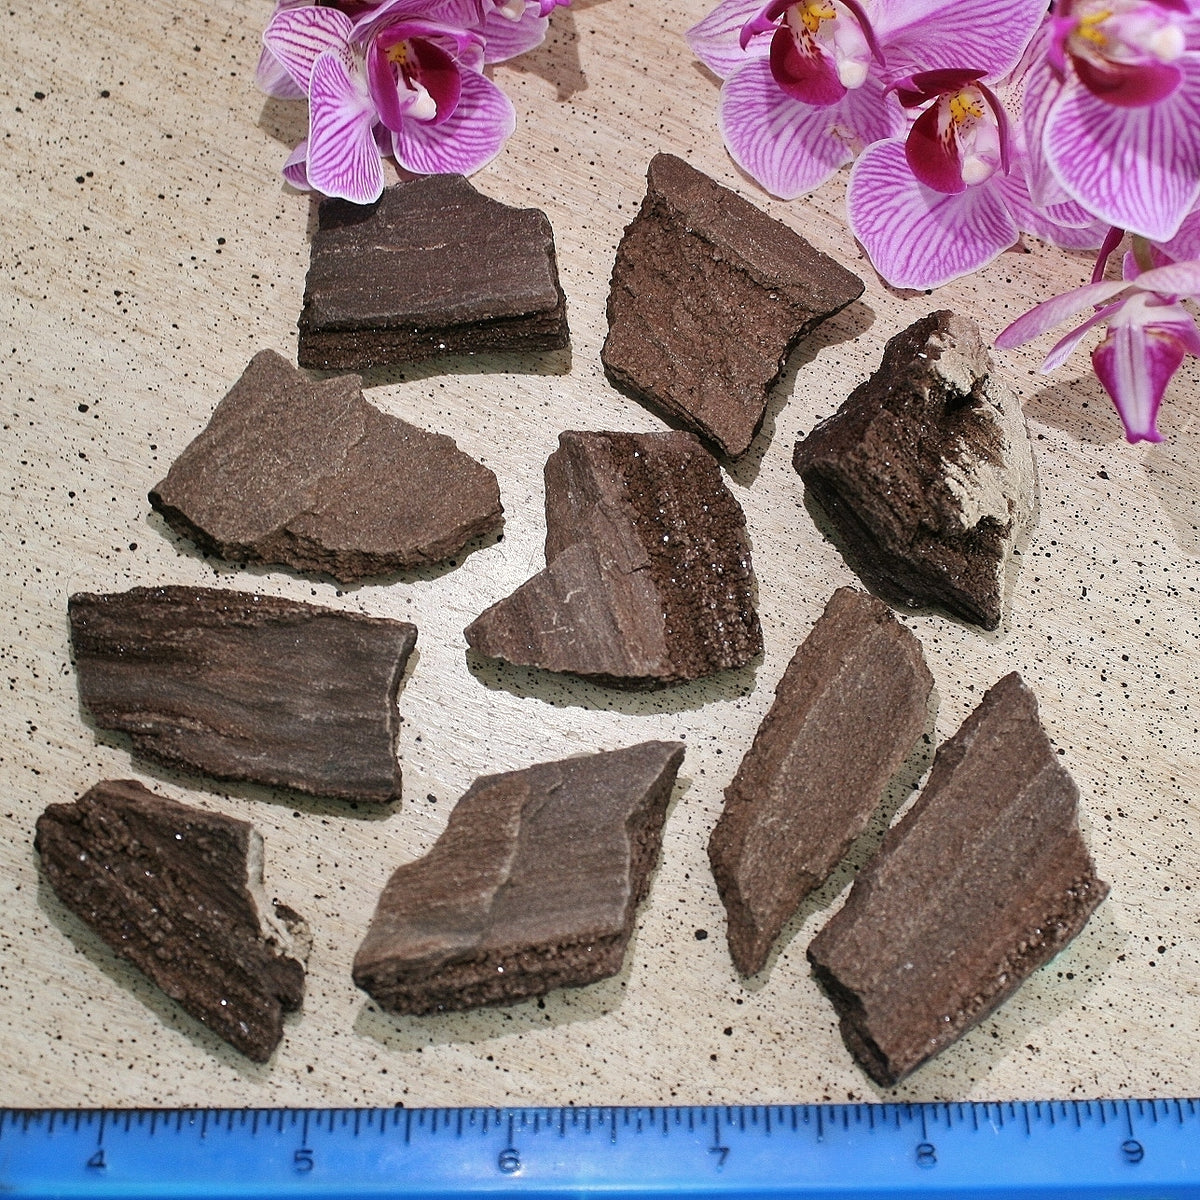 ONE Premineralized Wood, Drusy Specimens from Germany